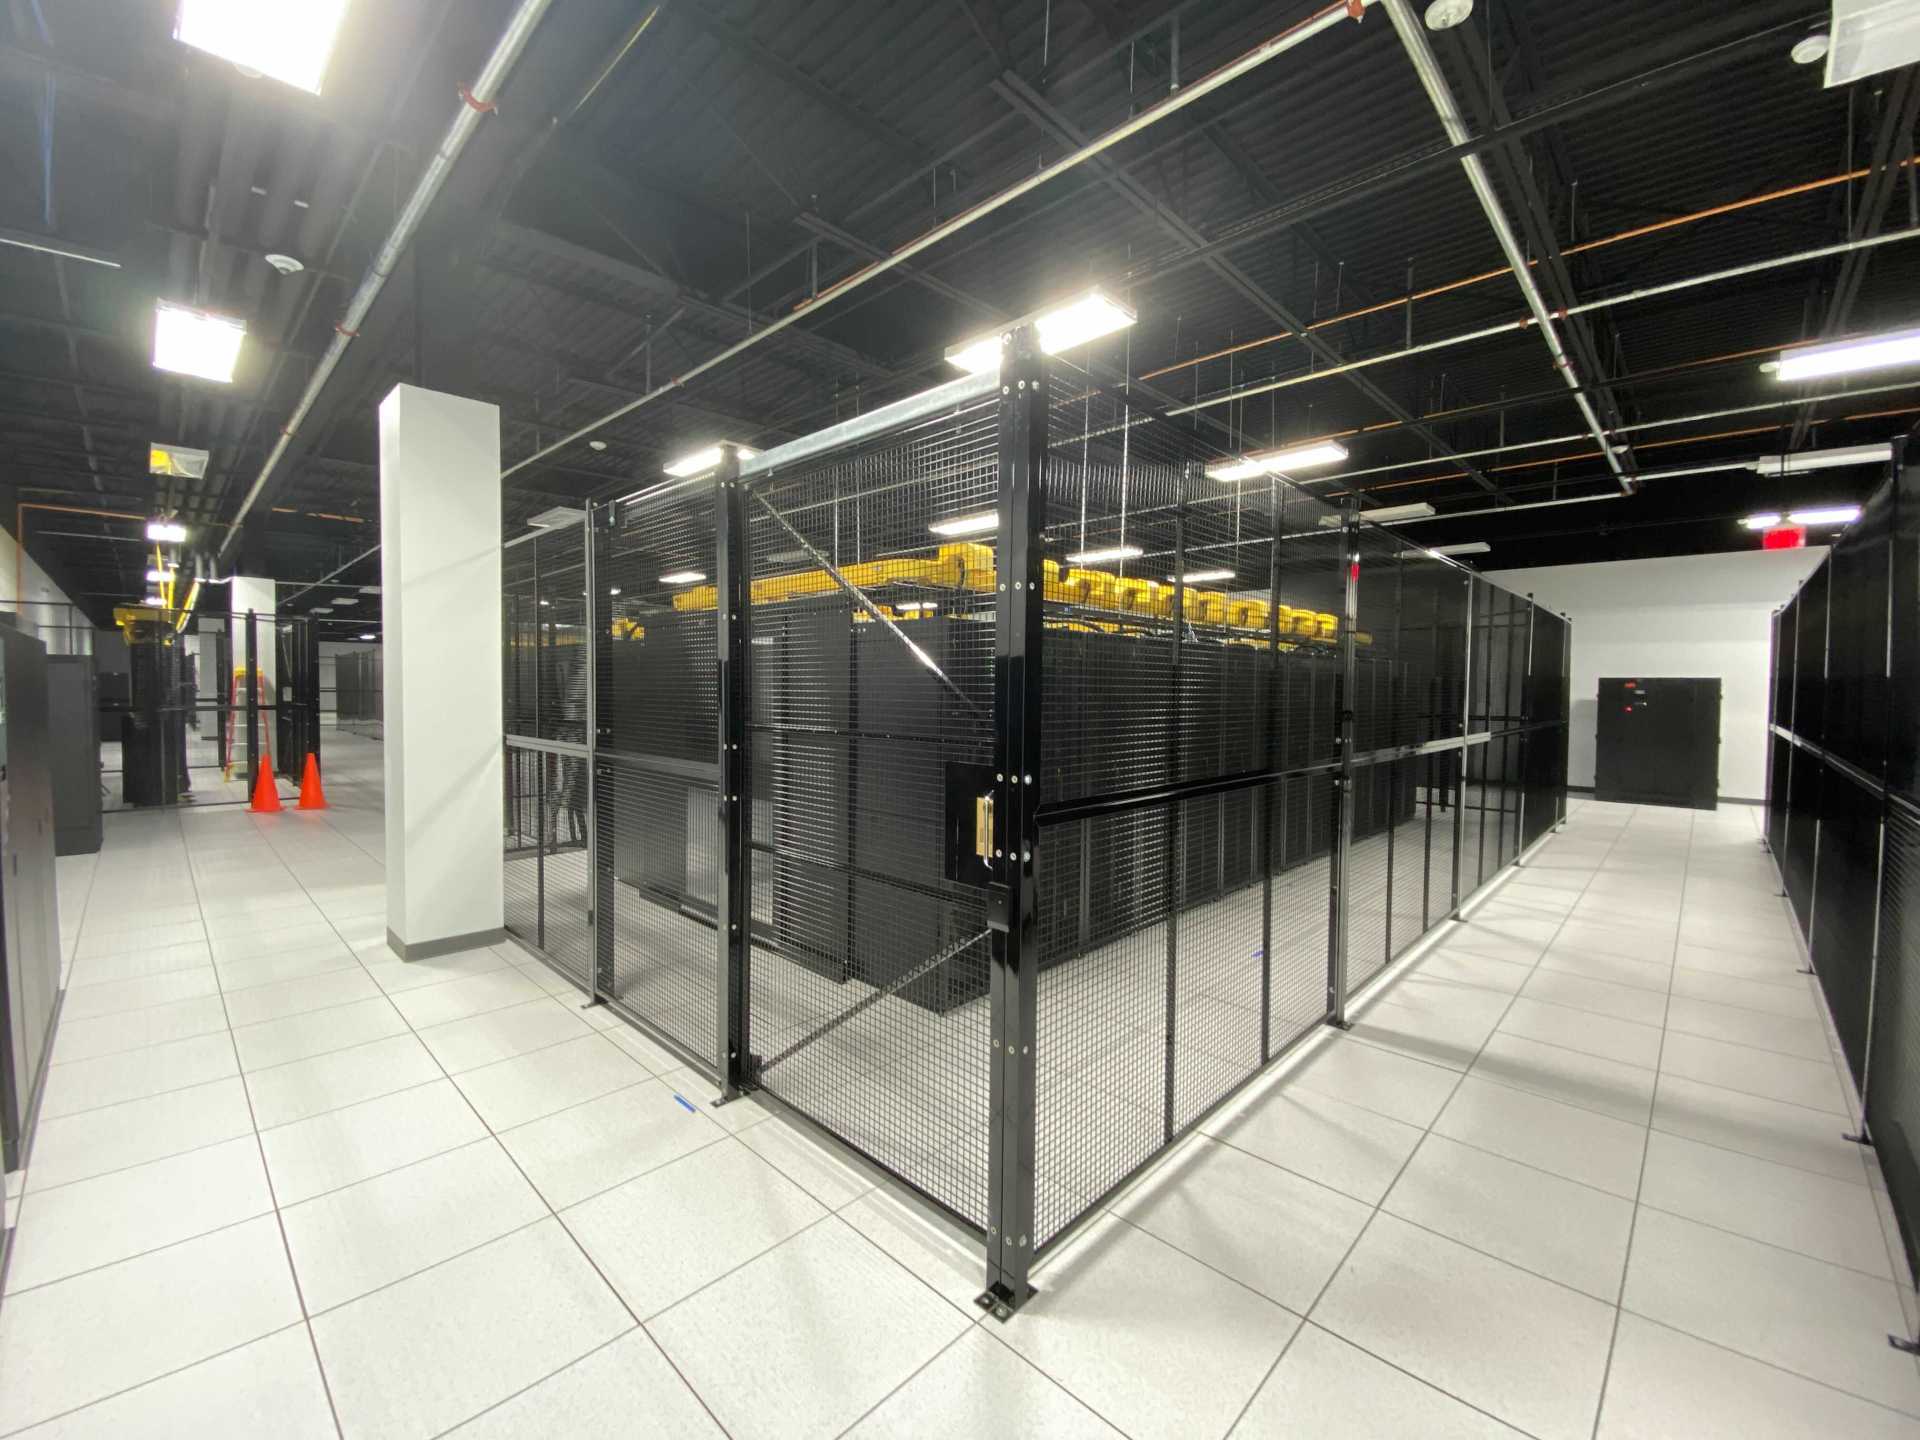 What You Need To Know About A Data Center Pod